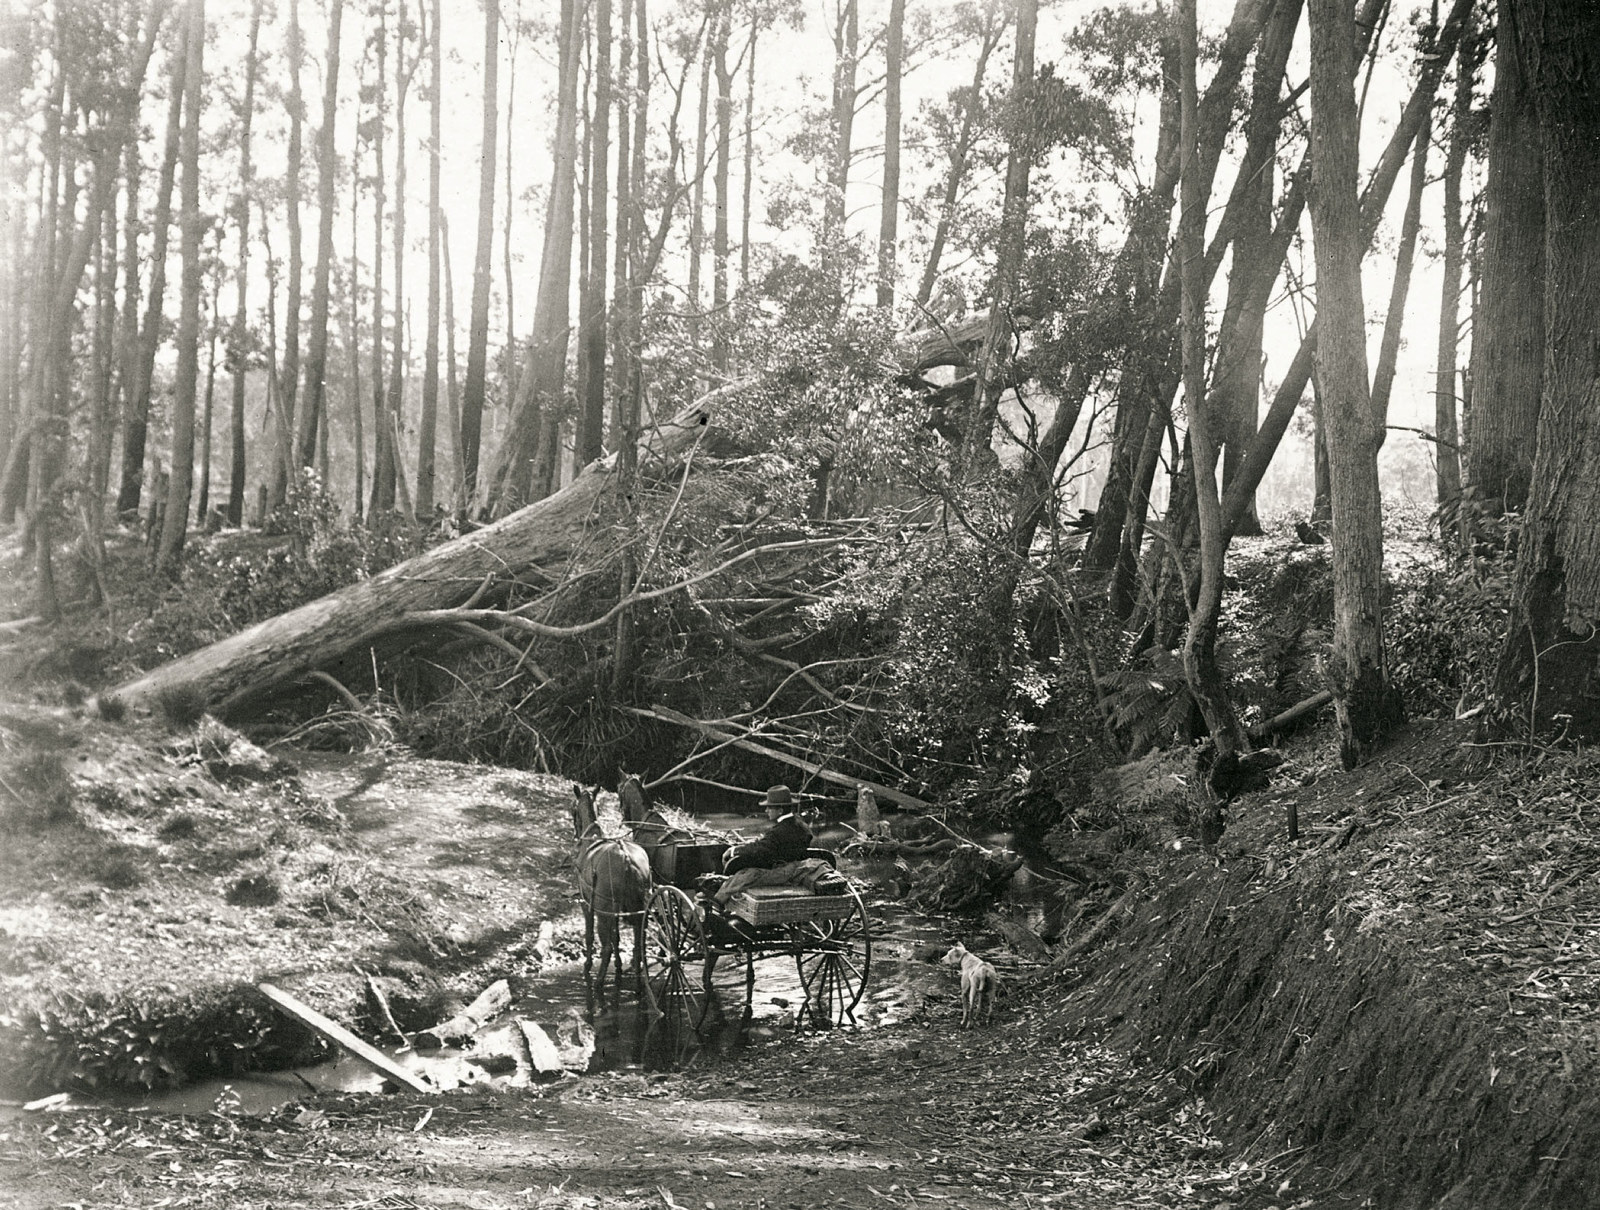 Cart with two horses pauses at a small creek. Tall trees surround the scene with a large fallen tree across the creek directly ahead of the cart.